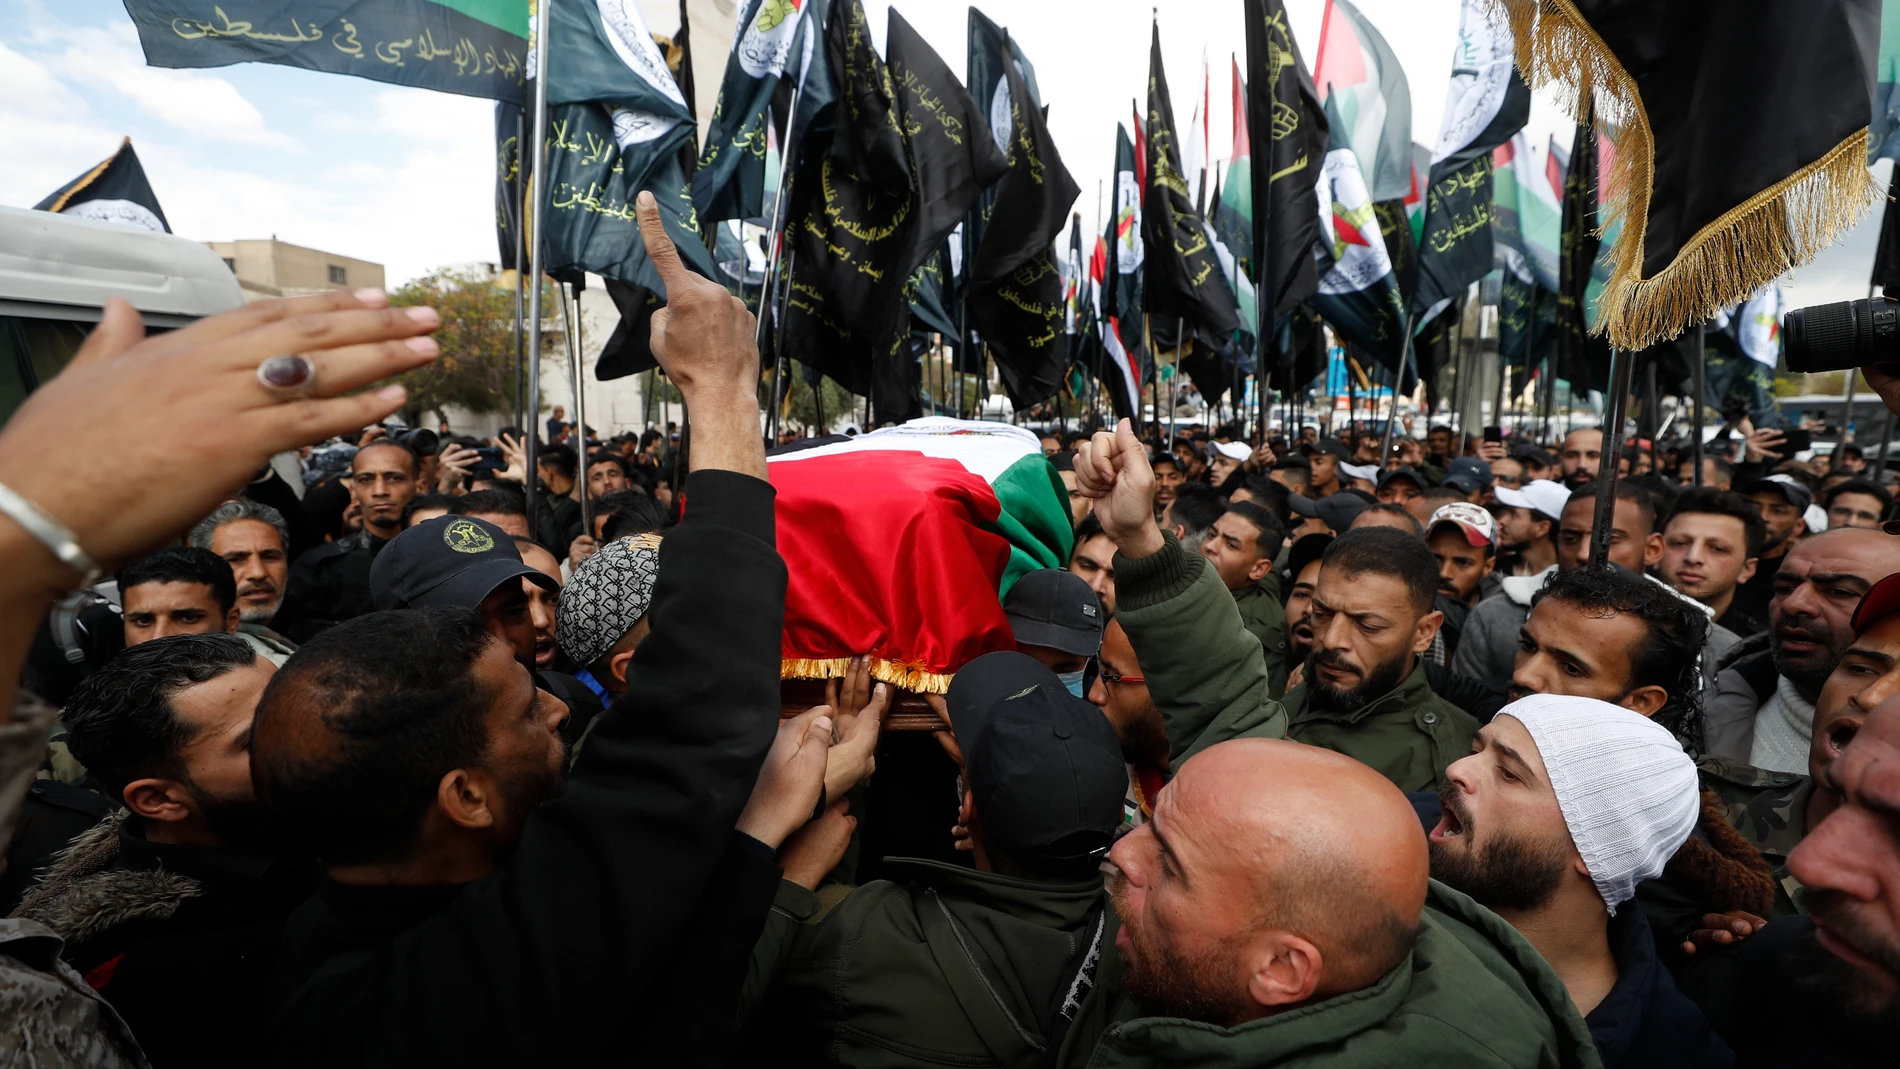 People attend the funeral of Ali Ramzi al-Aswad, a commander with the Palestinian militant group Islamic Jihad, in a Palestinian refugee camp of Yarmouk in Damascus, Syria, Monday, March 20, 2023. Al-Aswad was shot and killed Sunday outside his home in Yarmouk. Islamic Jihad group described the killing as an assassination by Israeli agents. There was no statement from Israel on the militant commander's death. (AP Photo/Omar Sanadiki)